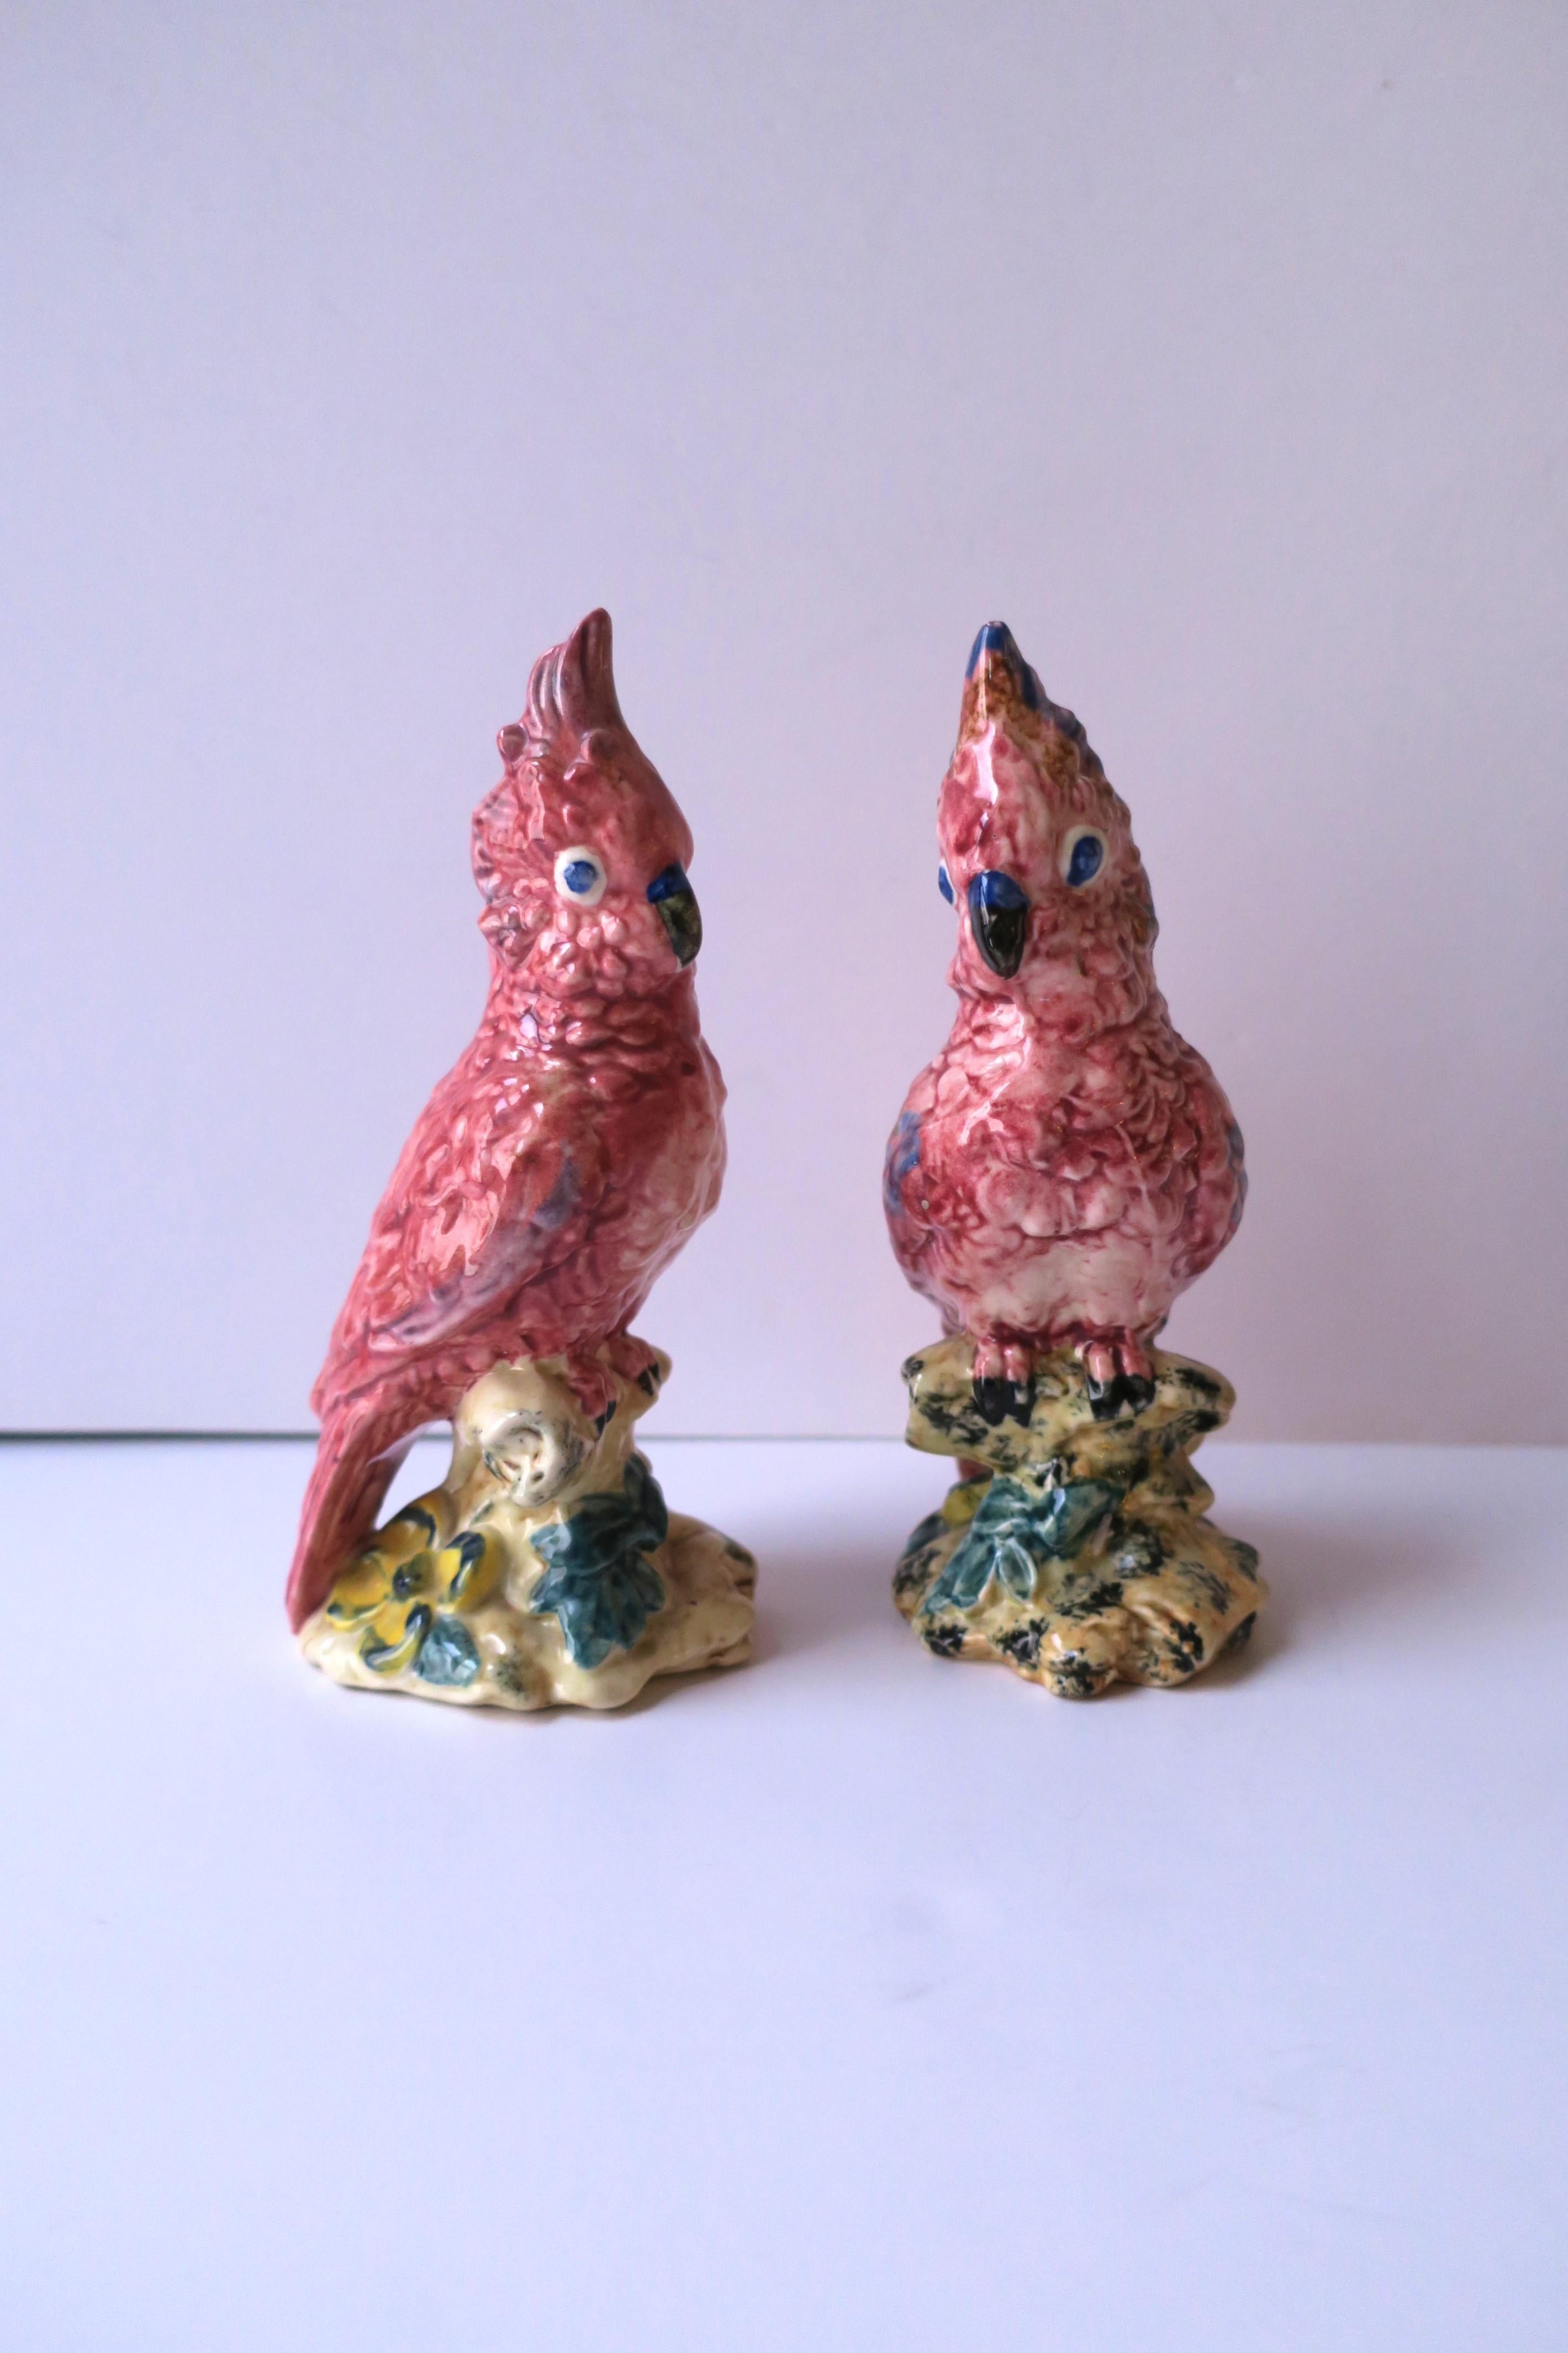 A beautiful pair of pink parrot birds, hand-painted, on branches with yellow hibiscus flower, circa mid-20th century, USA. A great set for a mantle, shelf, dining table, etc. Authentication marks include artist initials and markers' mark on bottom